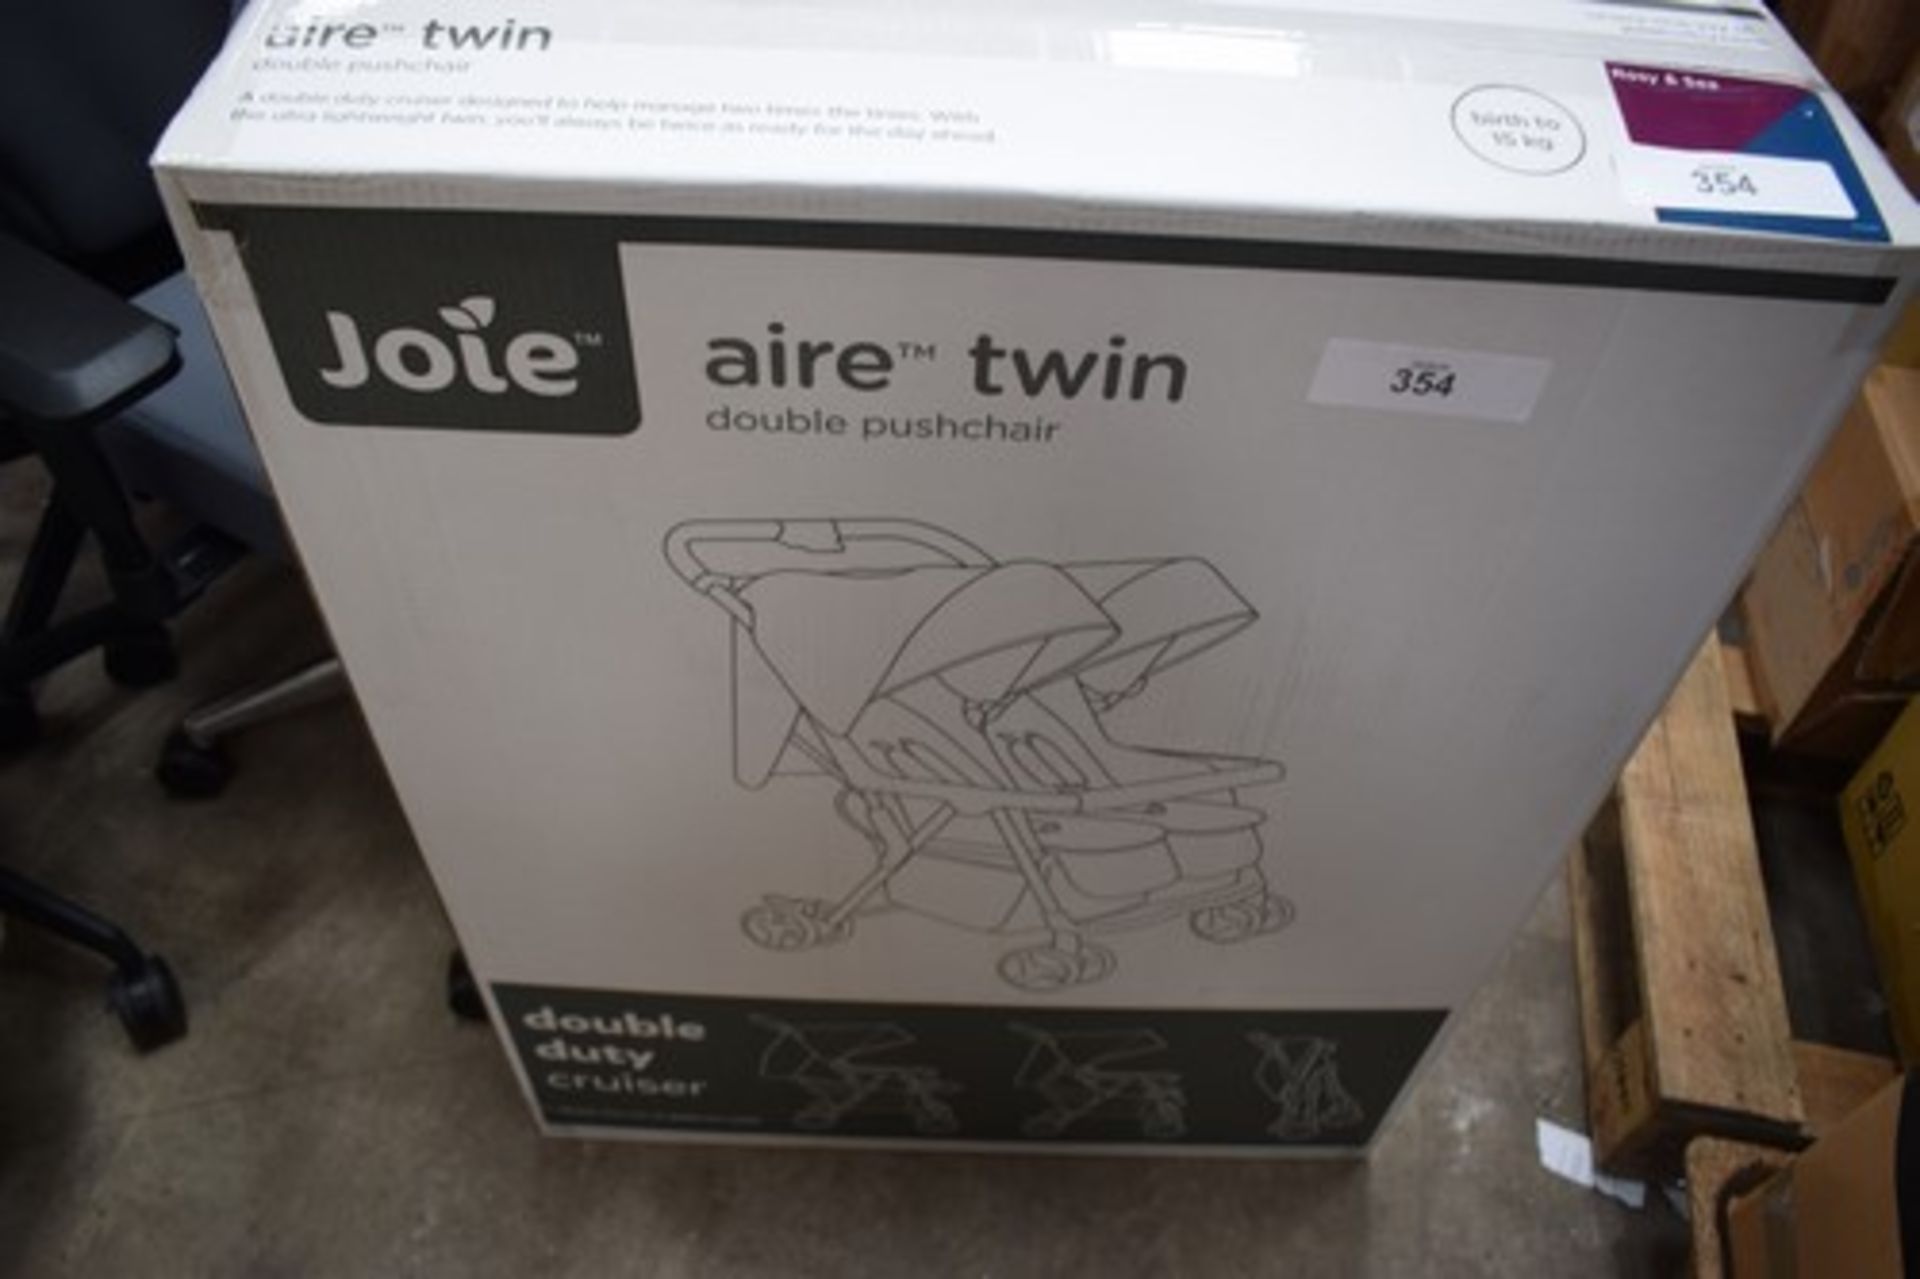 1 x Joie Aire twin Rosy & Sea double pushchair, code: S1217AERNS000, EAN: 5056080606156 - sealed new